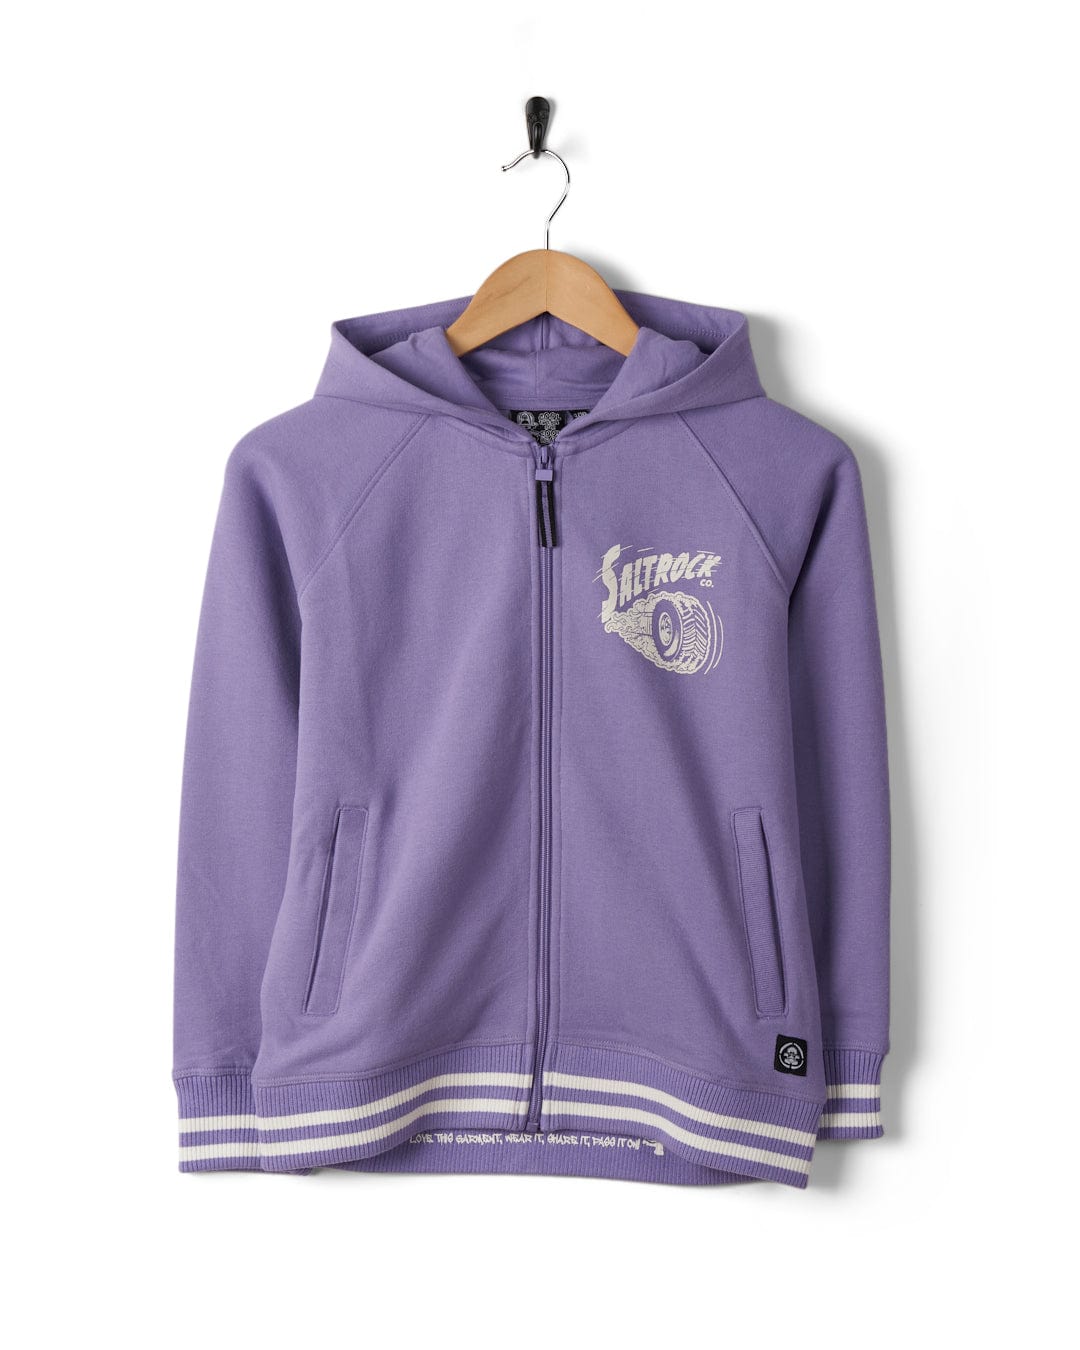 A purple full zip hoodie with "Saltrock" and a vinyl record design on the left chest, hanging on a black hook against a white background.